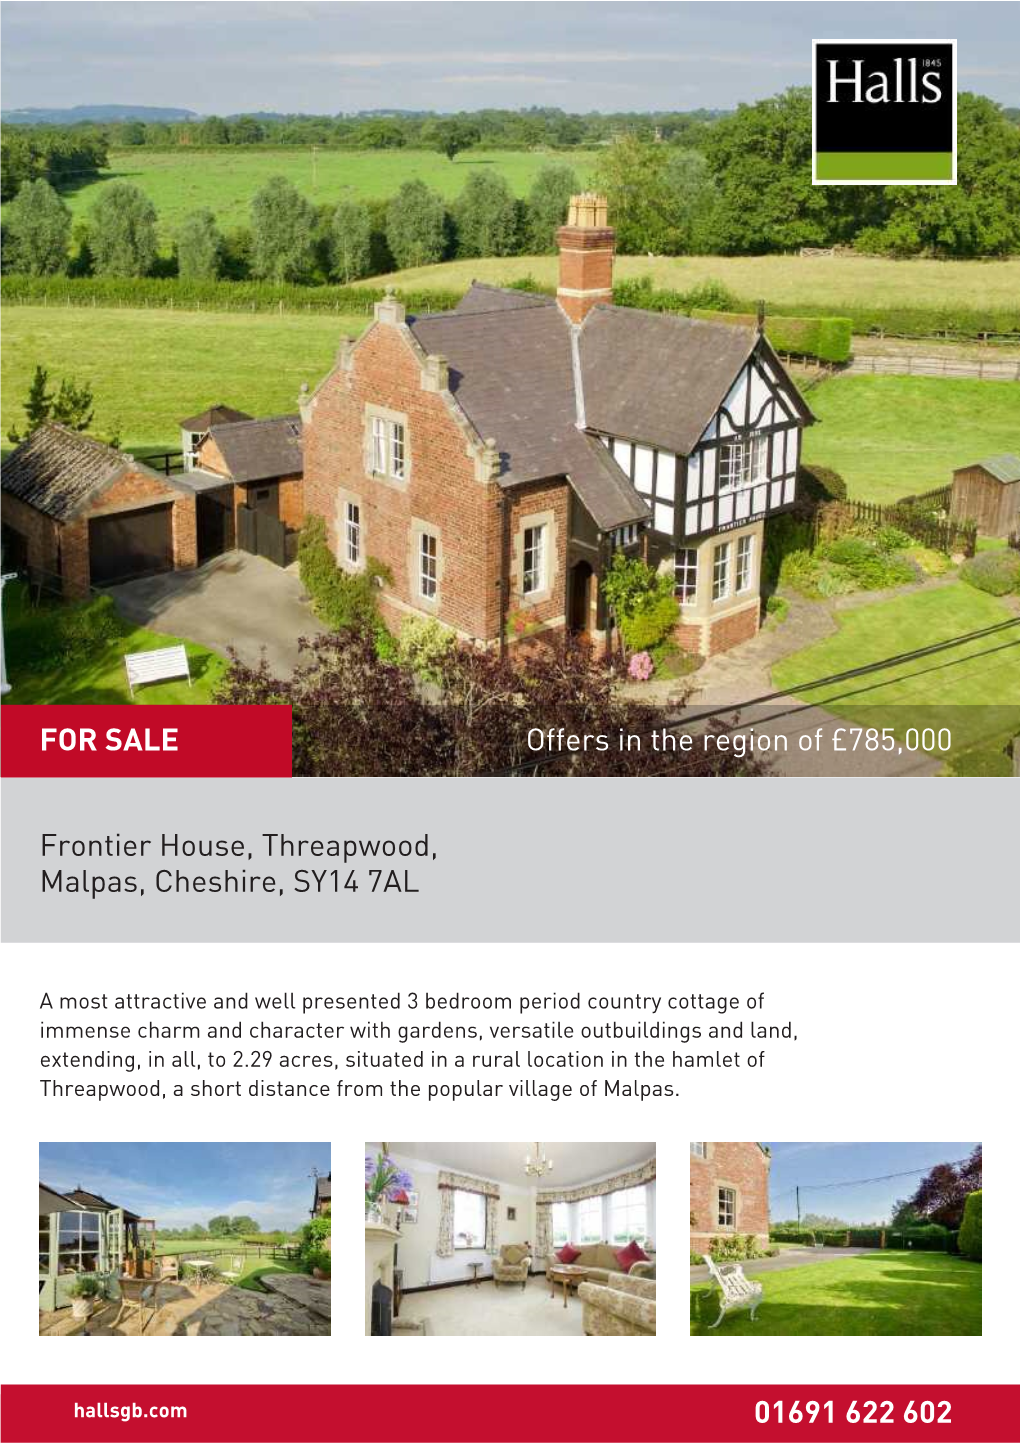 Frontier House, Threapwood, Malpas, Cheshire, SY14 7AL 01691 622 602 Offers in the Region of £785,000 for SALE